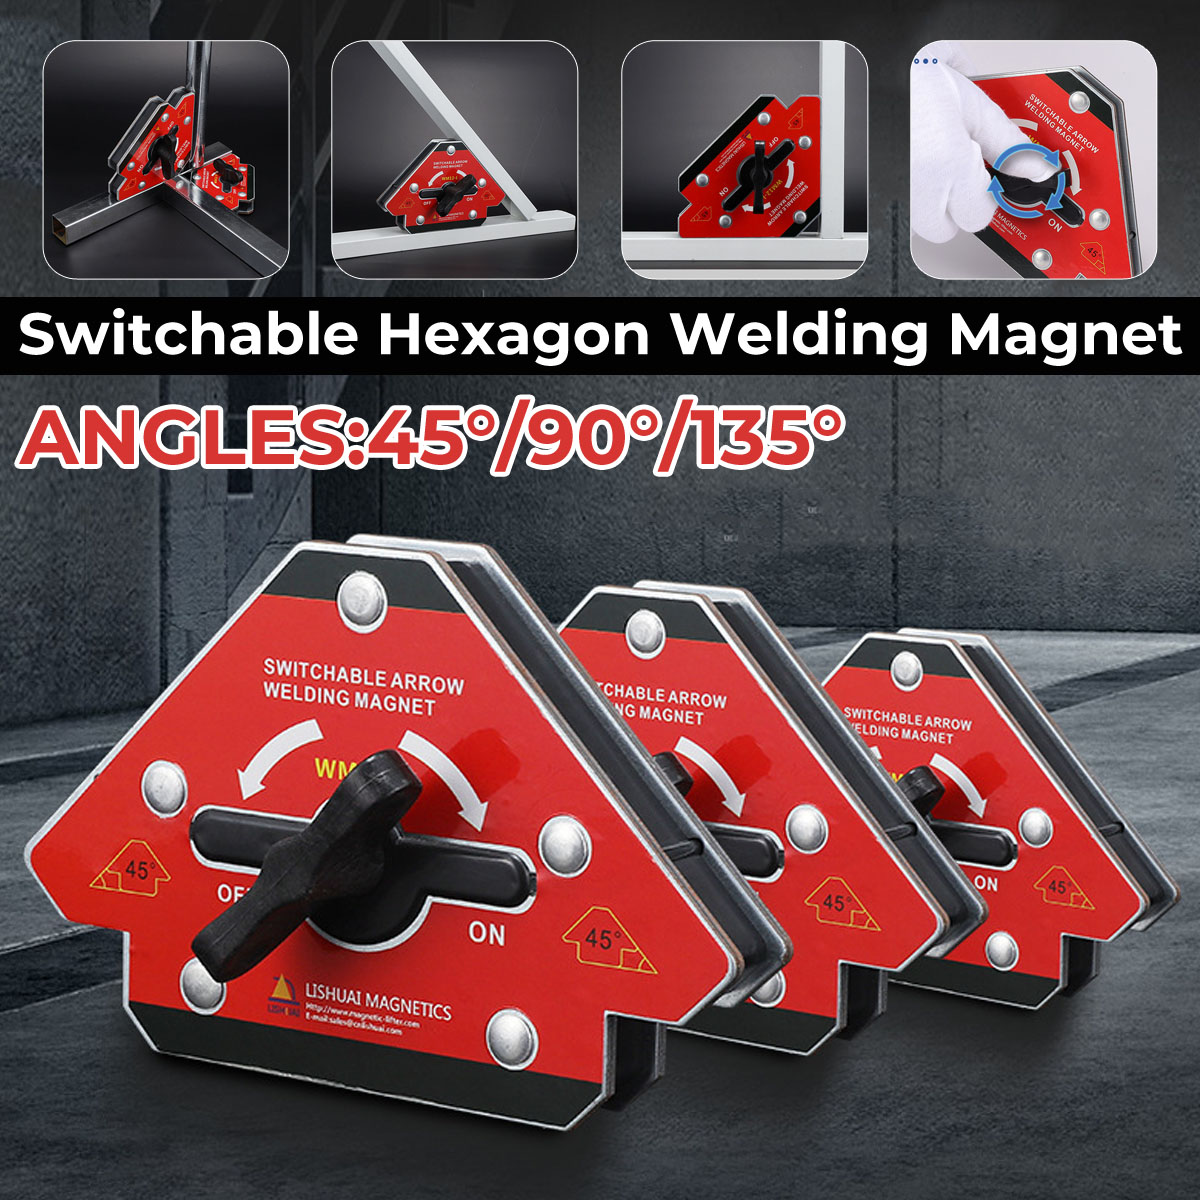 Switchable-Hexagon-Welding-Magnet-Strong-Multi-angle-Welding-Holder-1725547-1